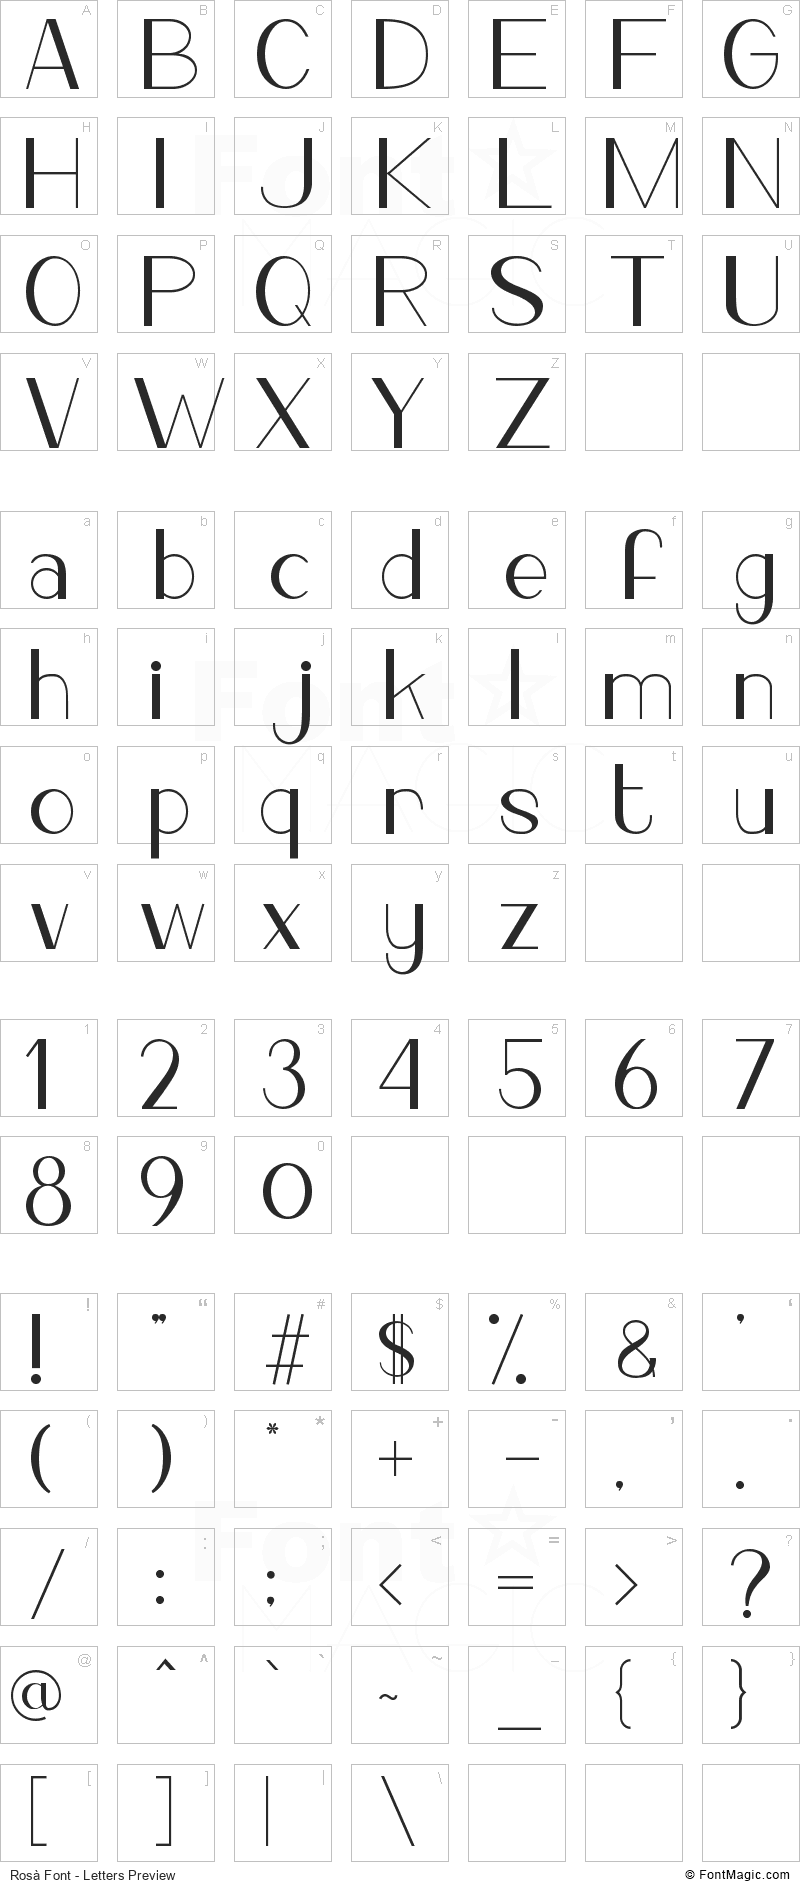 Rosà Font - All Latters Preview Chart